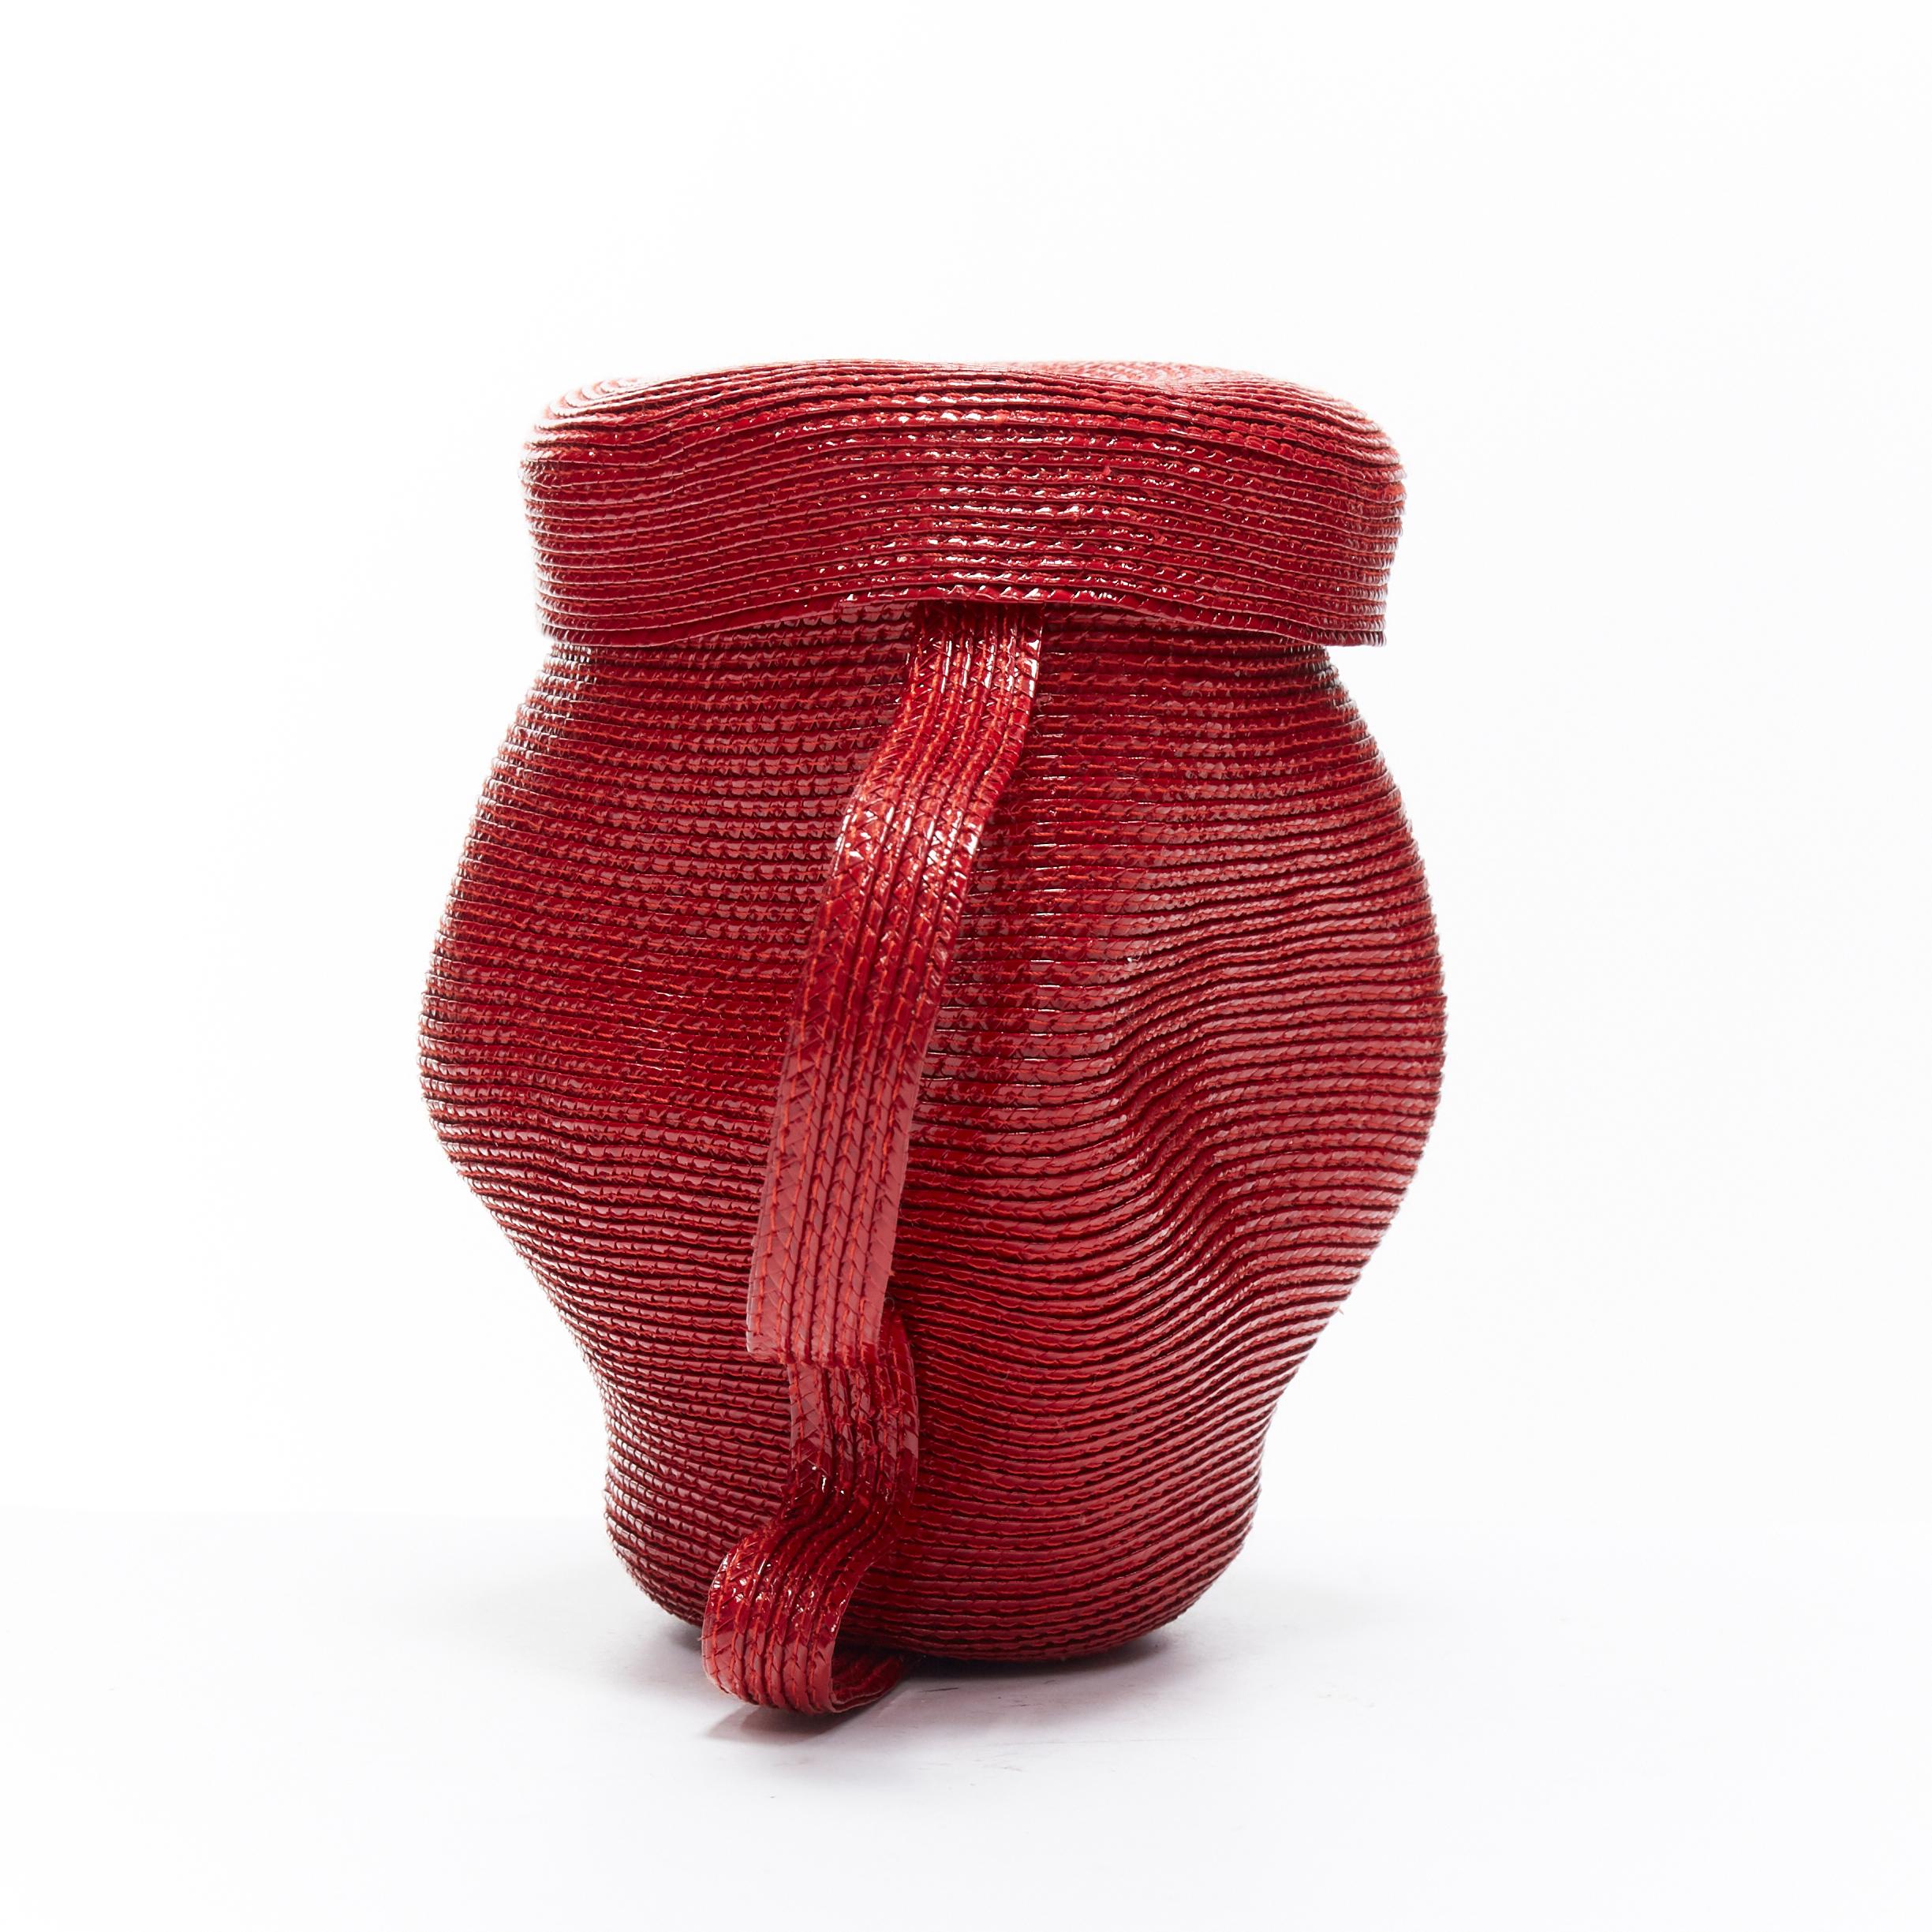 Red ROSIE ASSOULIN red lacquered woven raffia top lid Jug small novelty clutch bag